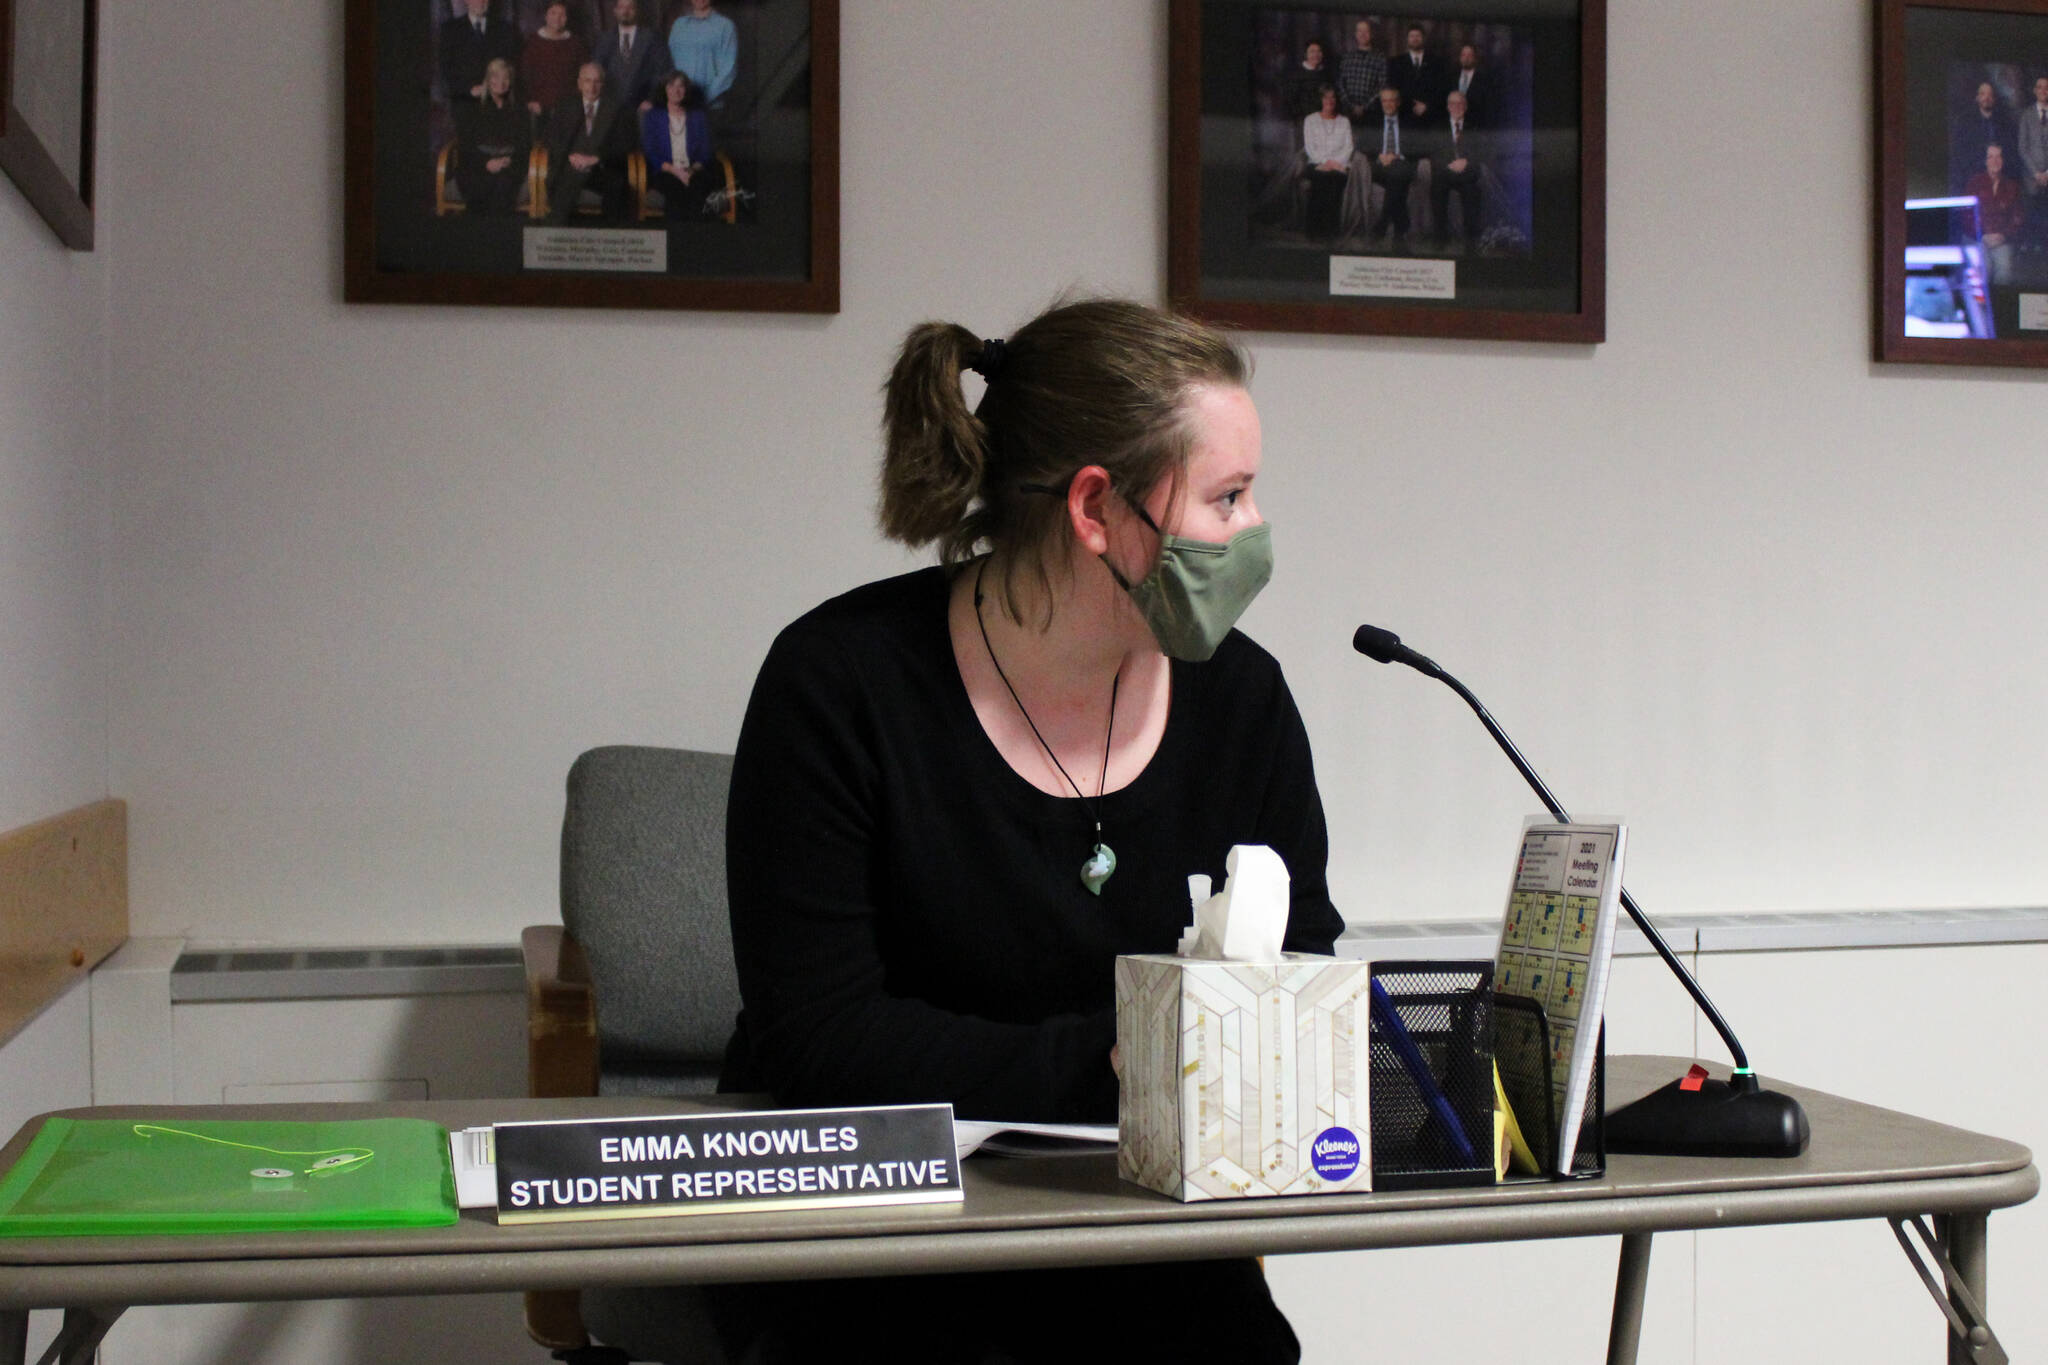 Emma Knowles speaks at a meeting of the Soldotna City Council on Sept. 8, 2021 in Soldotna, Alaska. (Ashlyn O’Hara/Peninsula Clarion)